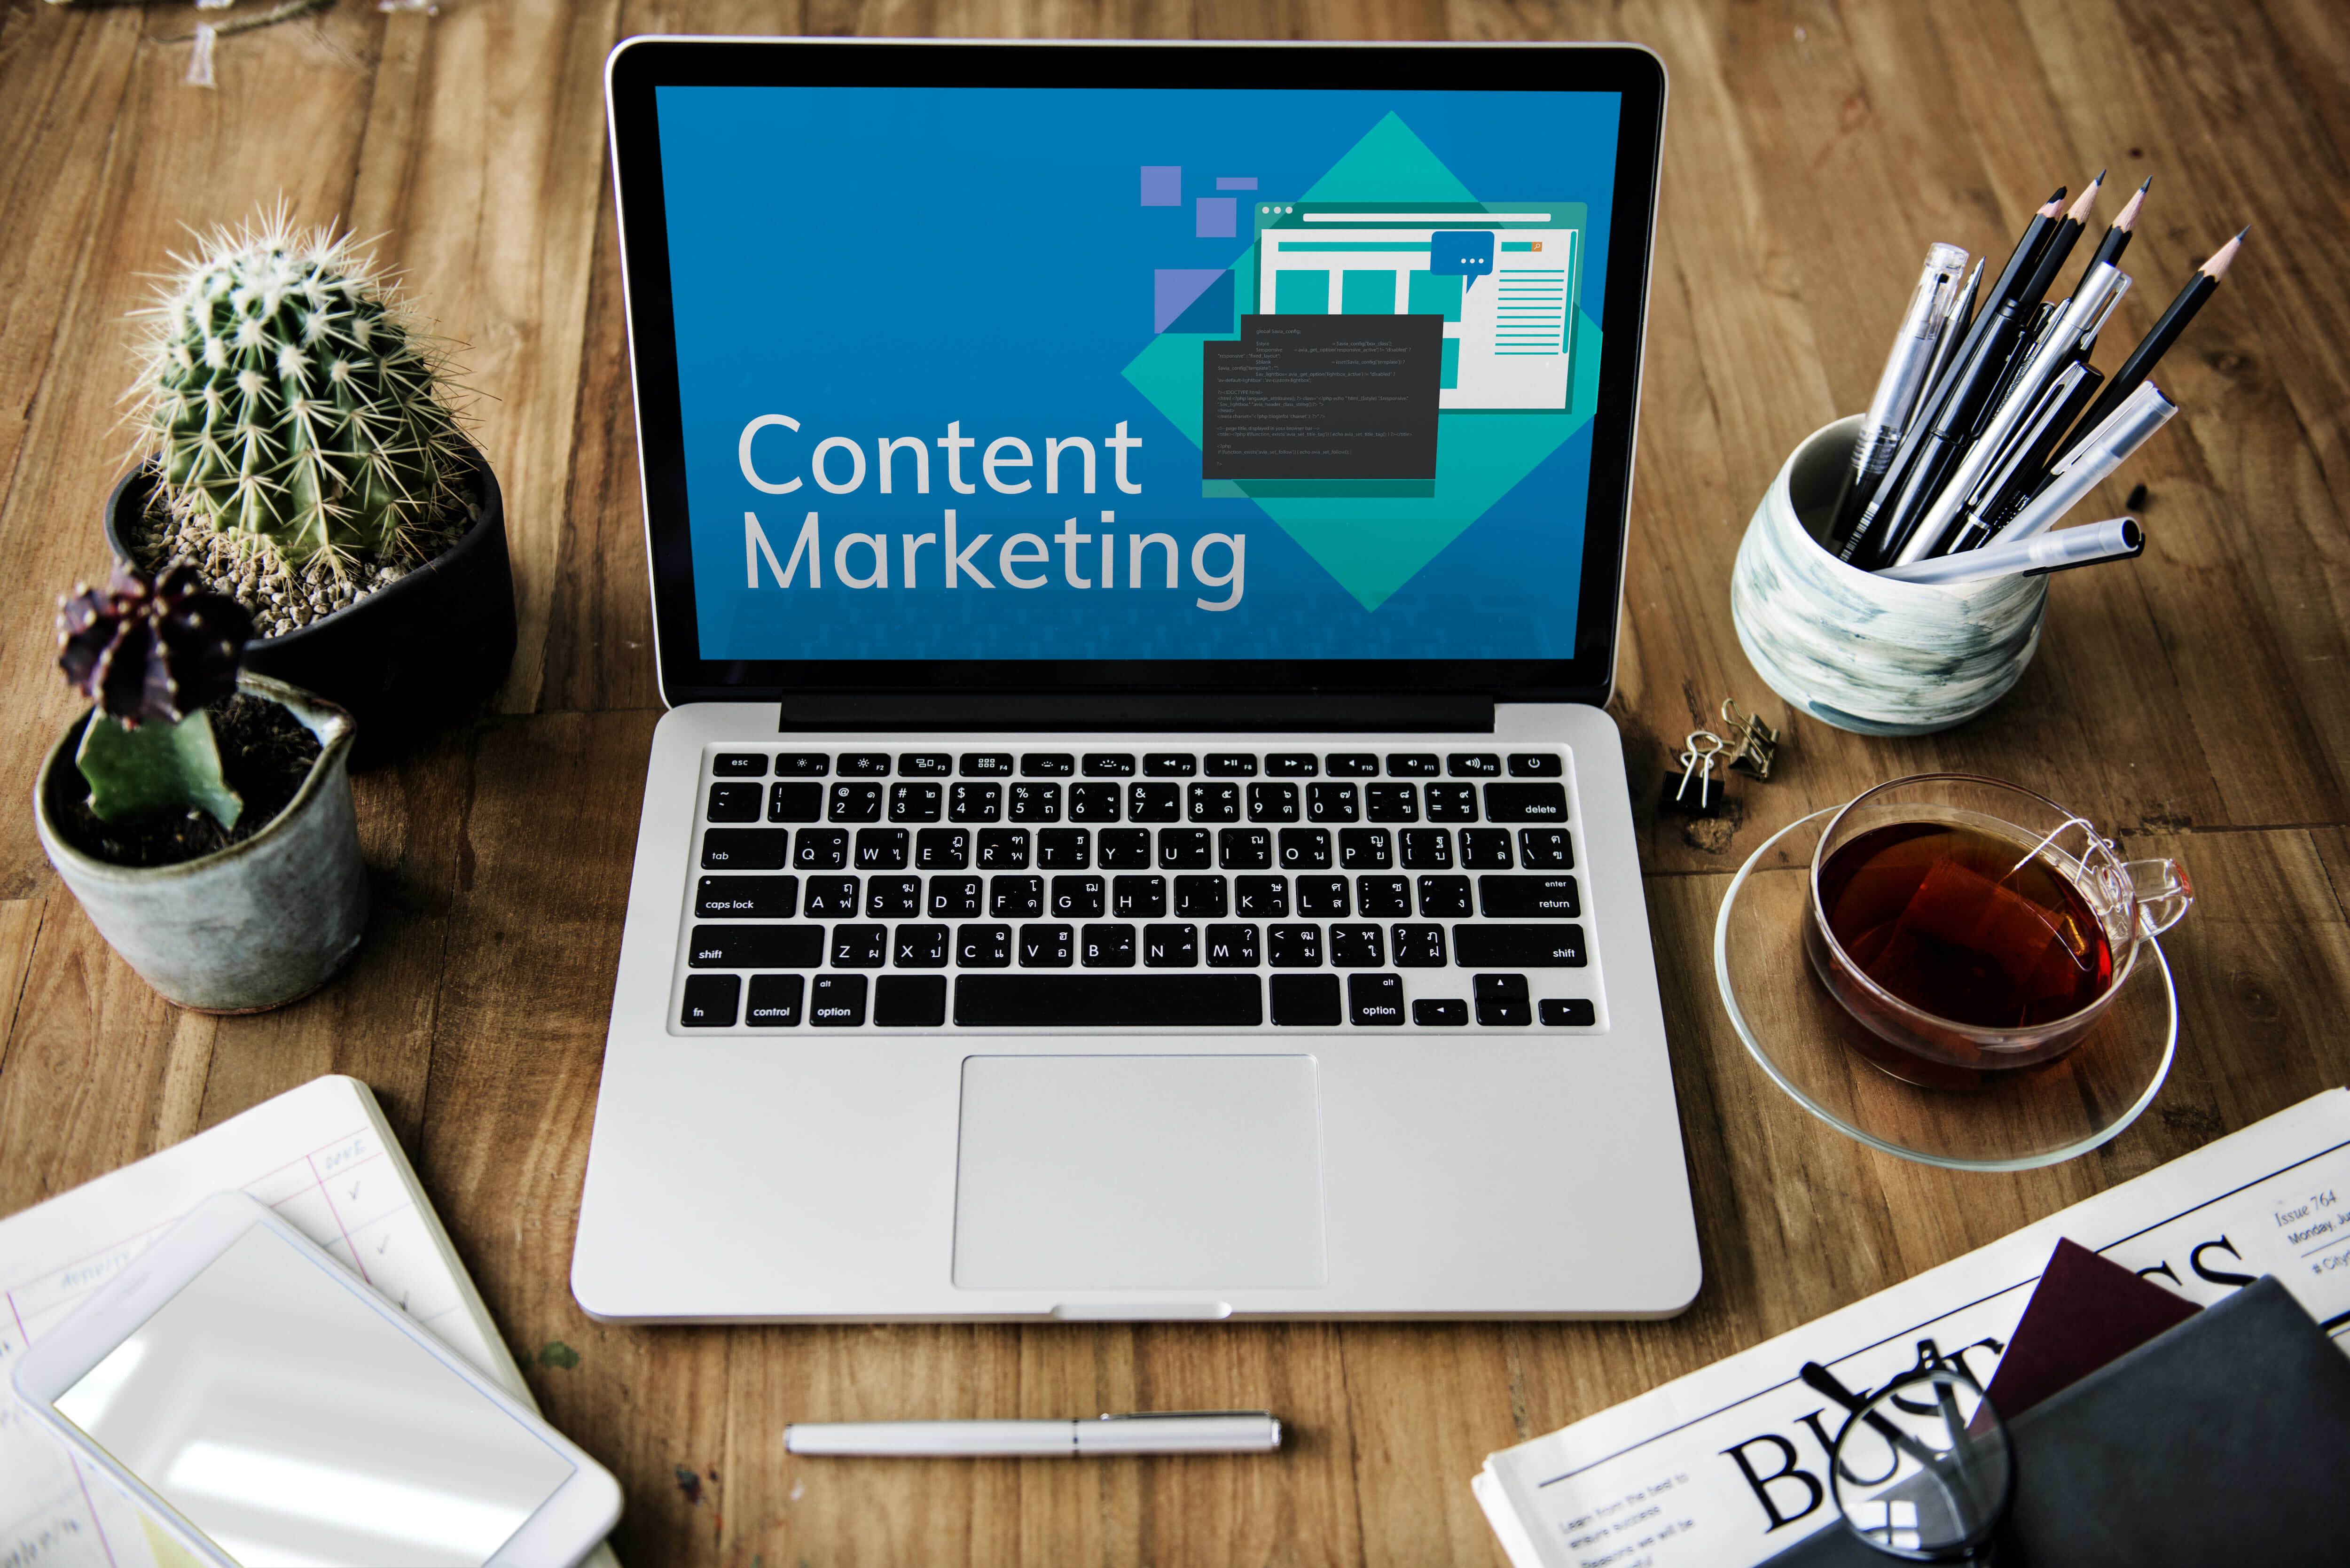 How to Use Content Marketing to Promote Your Business?